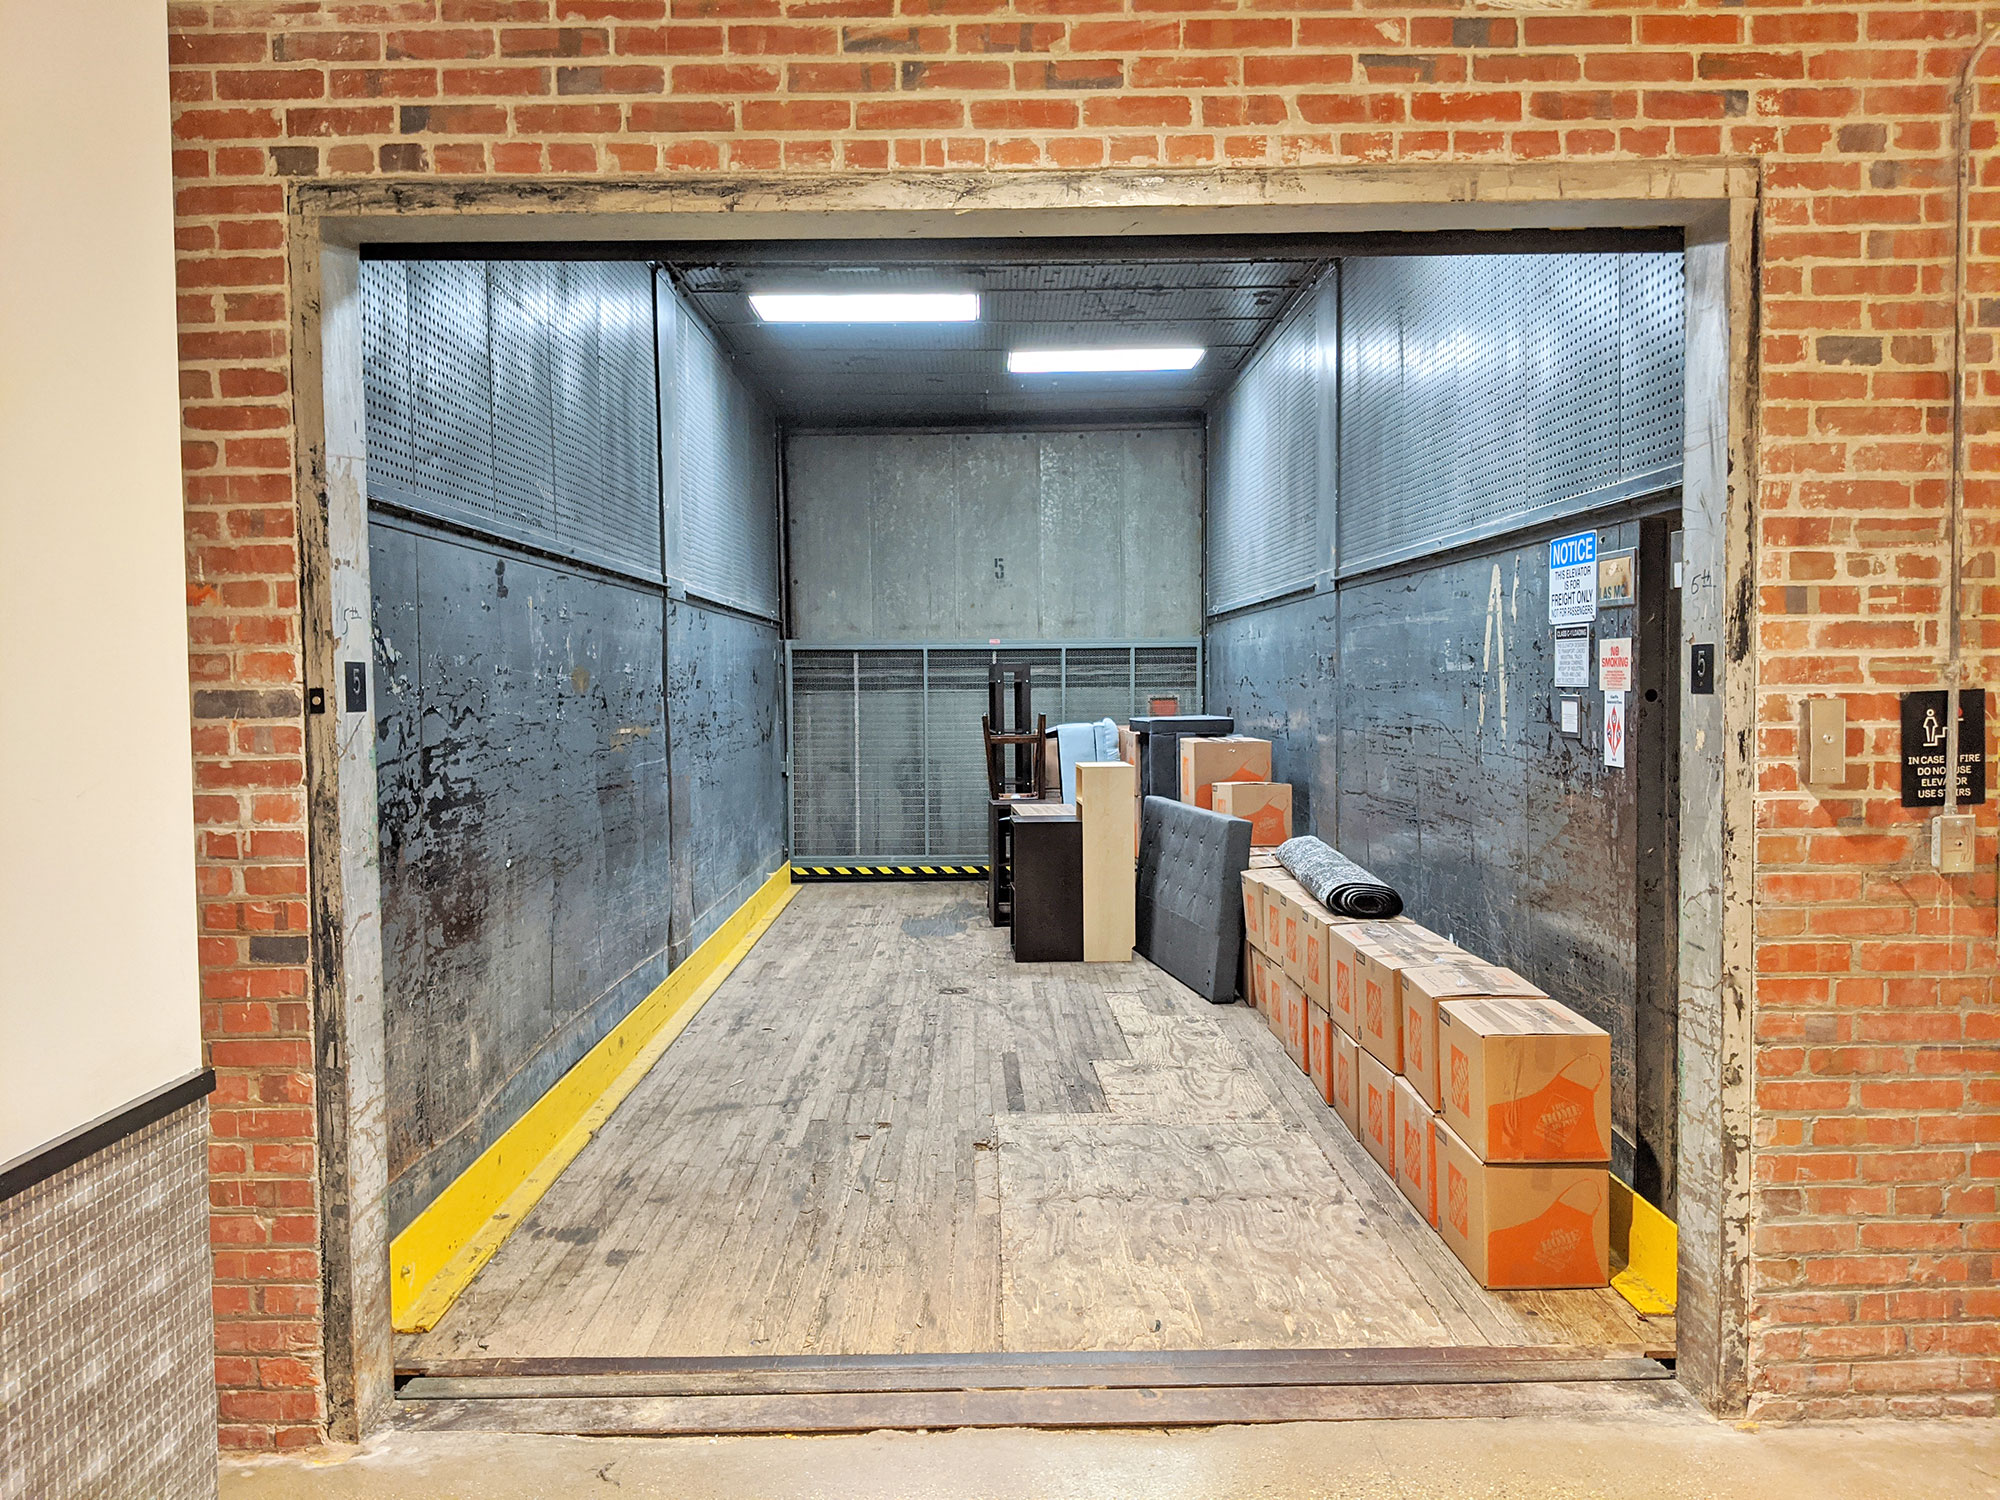 Packing the elevator at Hecht Warehouse in Washington DC.